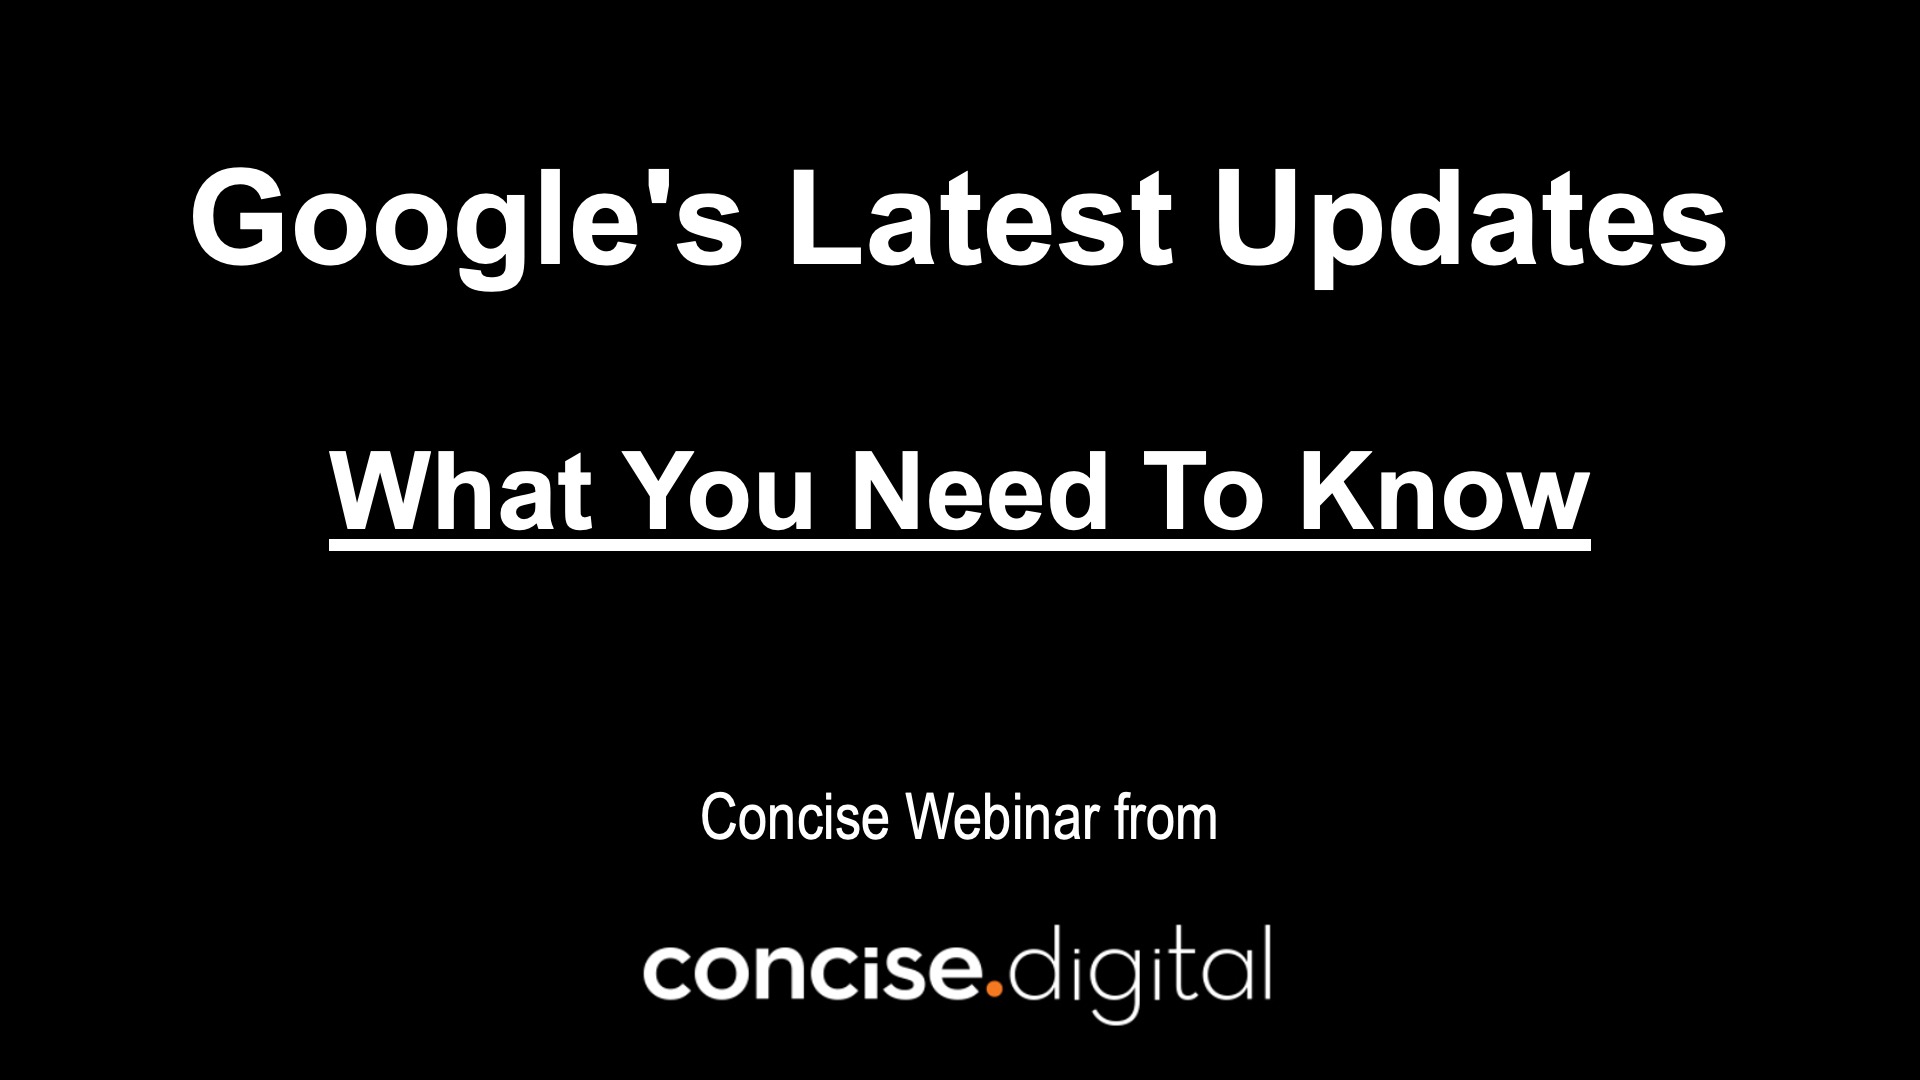 Google’s Latest Updates – What You Need To Know (Concise Webinar)